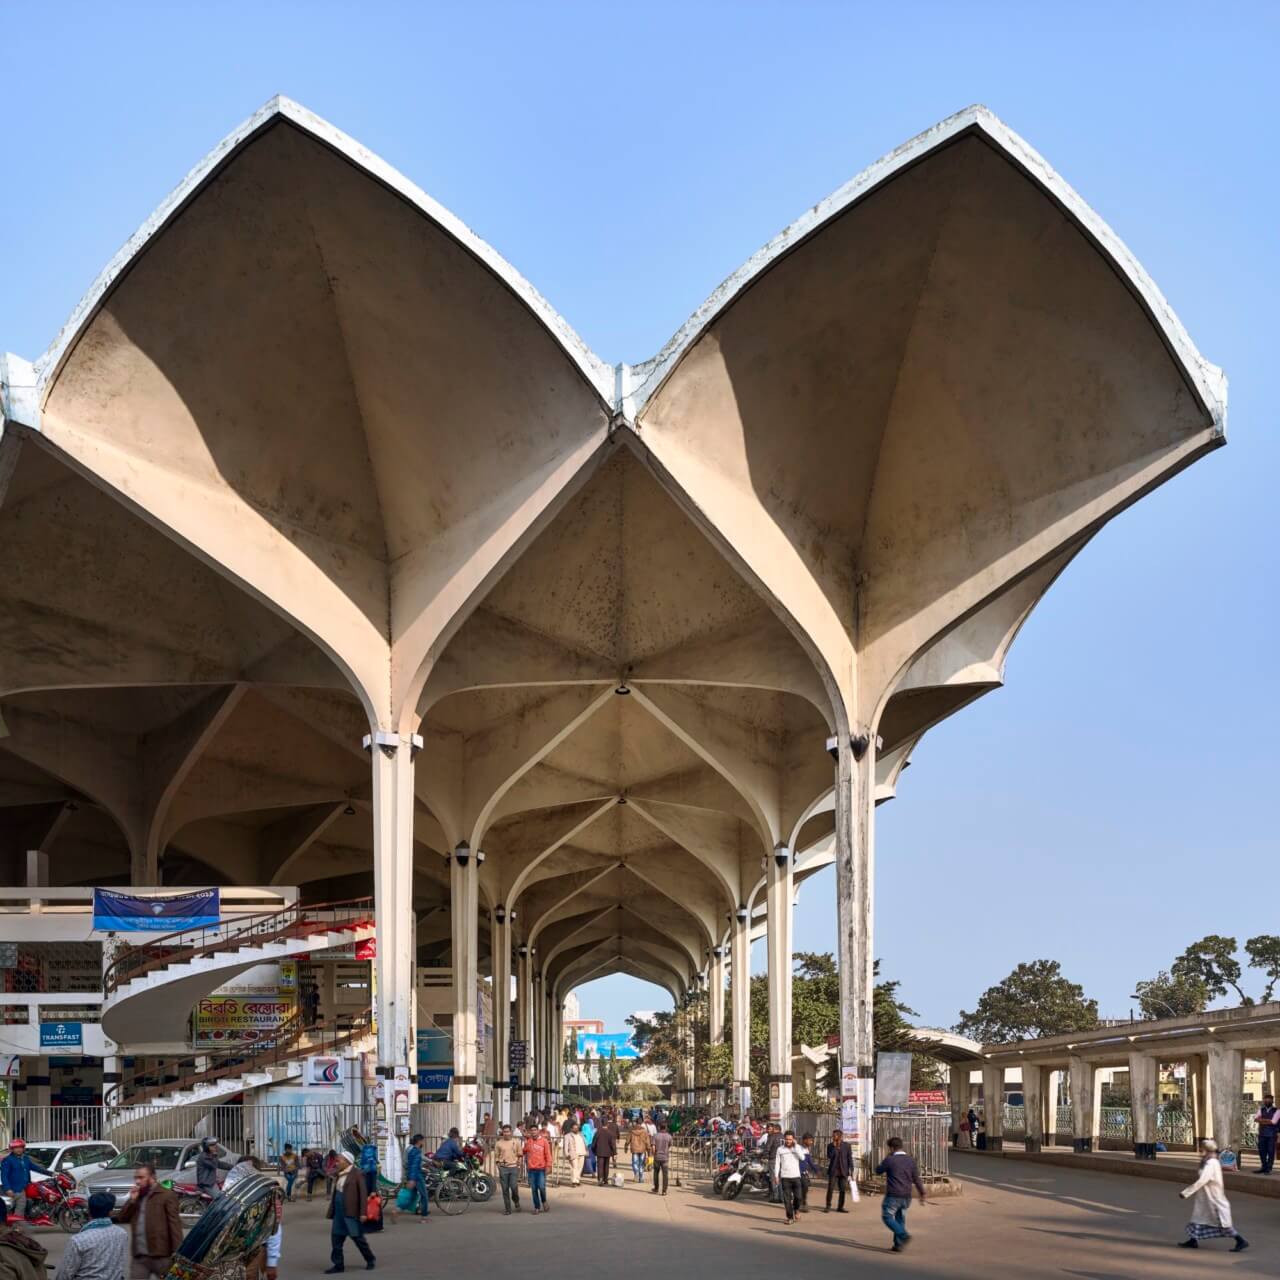 photograph depicting a train station with a scalloped, sculpture concrete roof